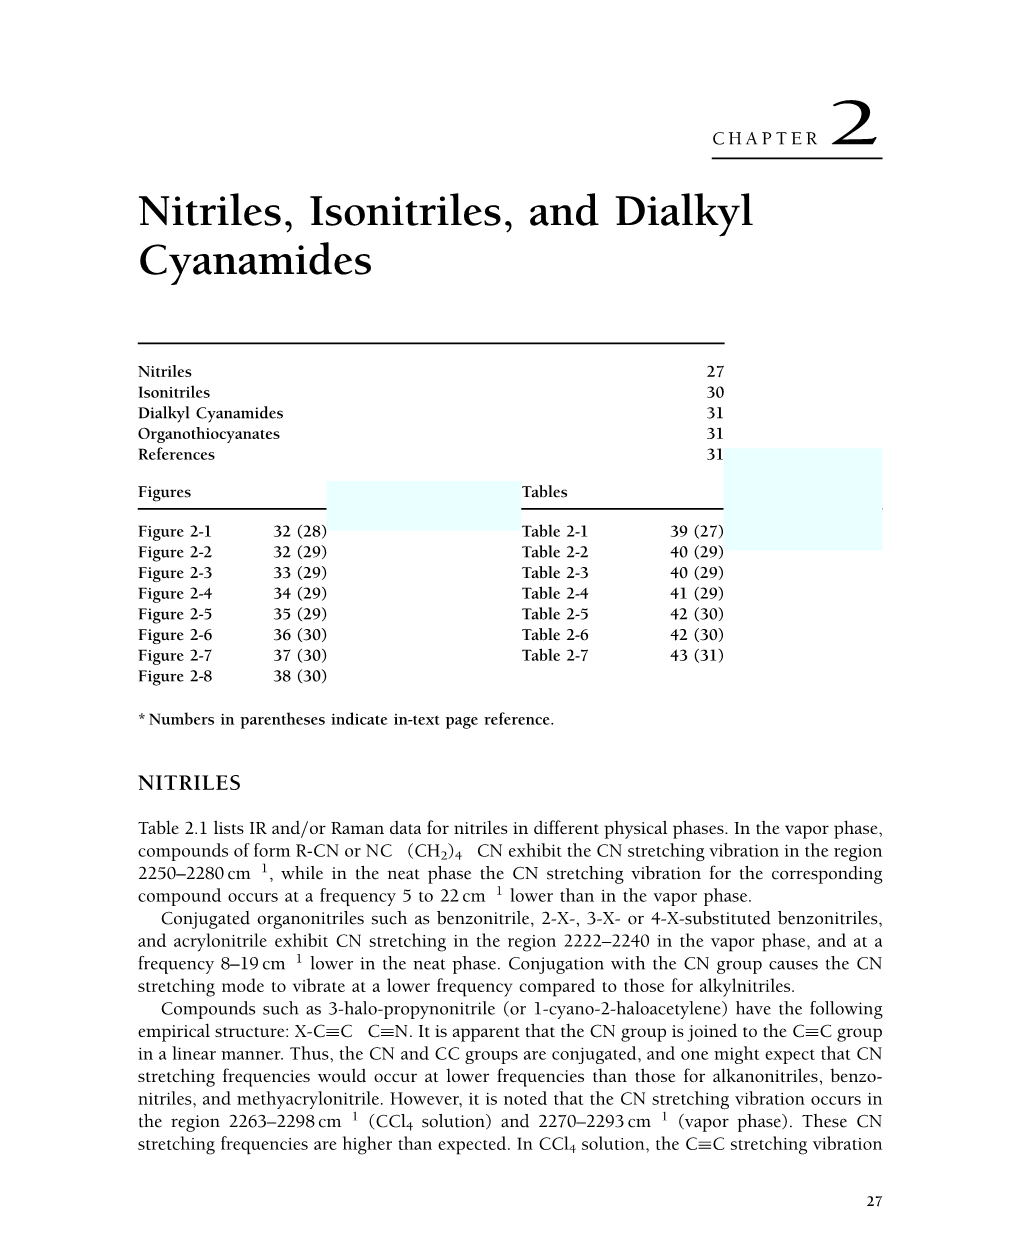 Nitriles, Isonitriles, and Dialkyl Cyanamides